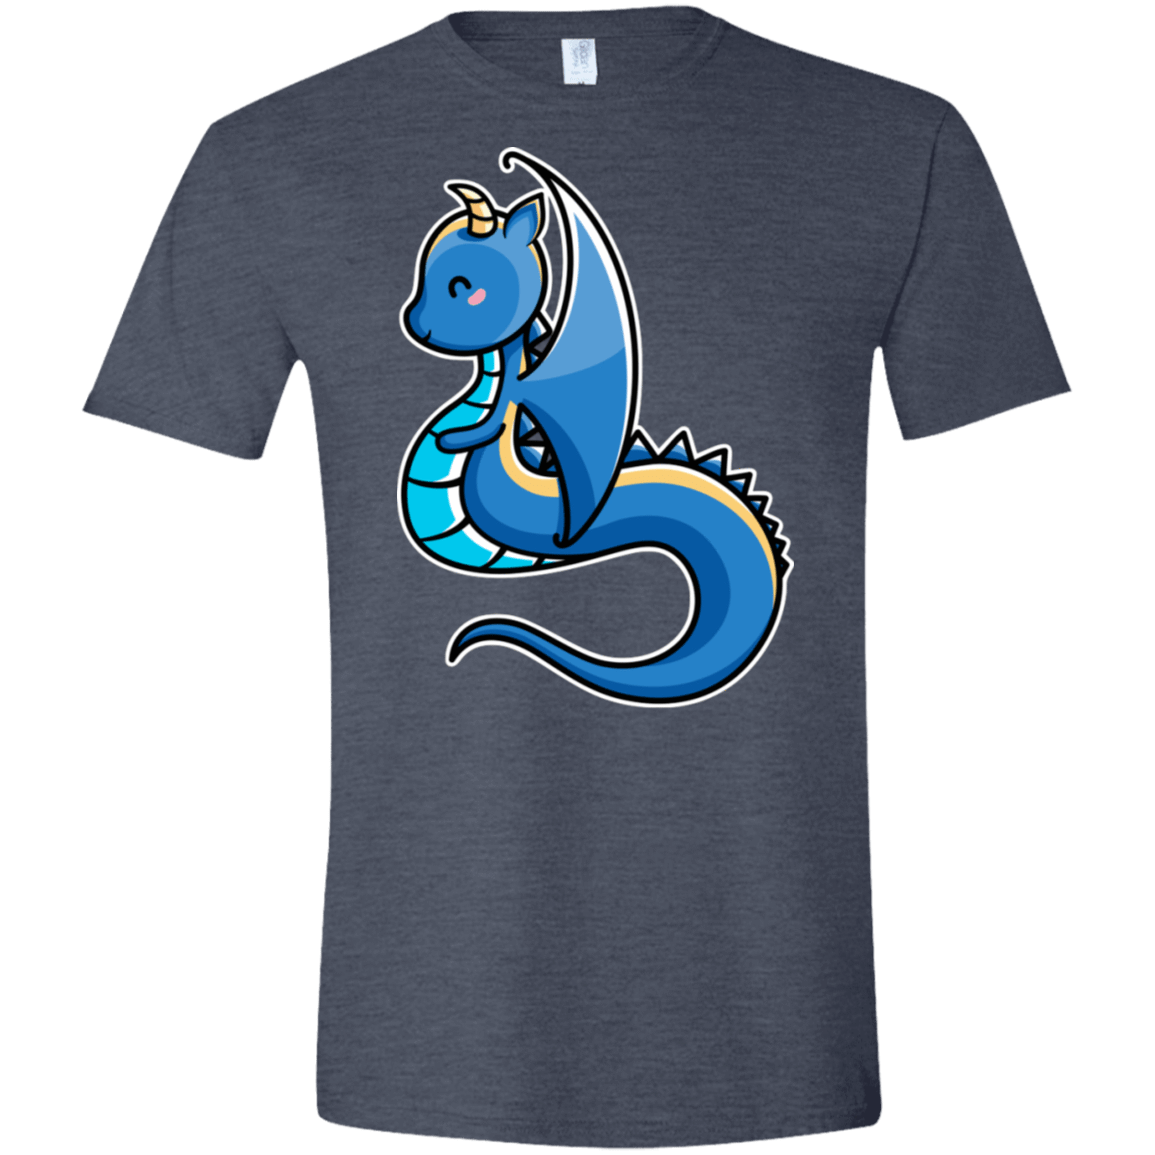 T-Shirts Heather Navy / S Kawaii Cute Dragon Men's Semi-Fitted Softstyle